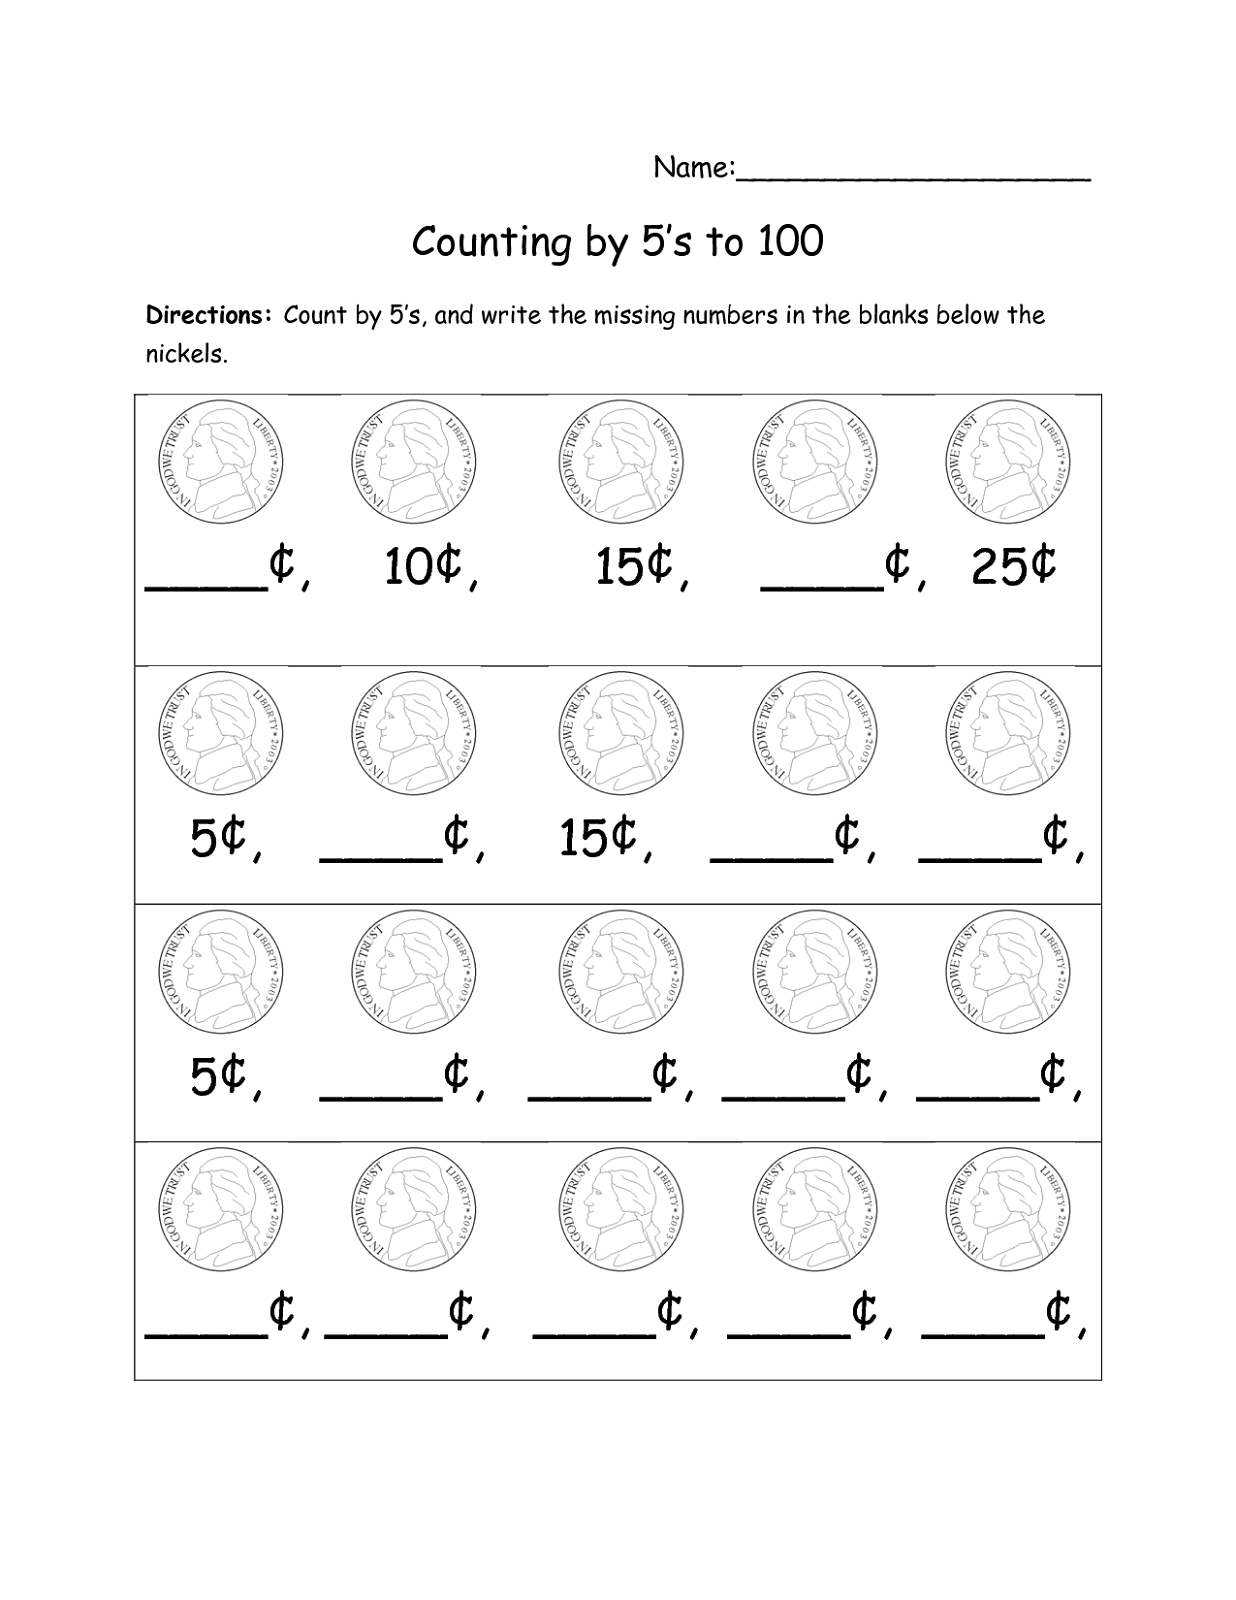 skip-count-by-5-worksheet-coin